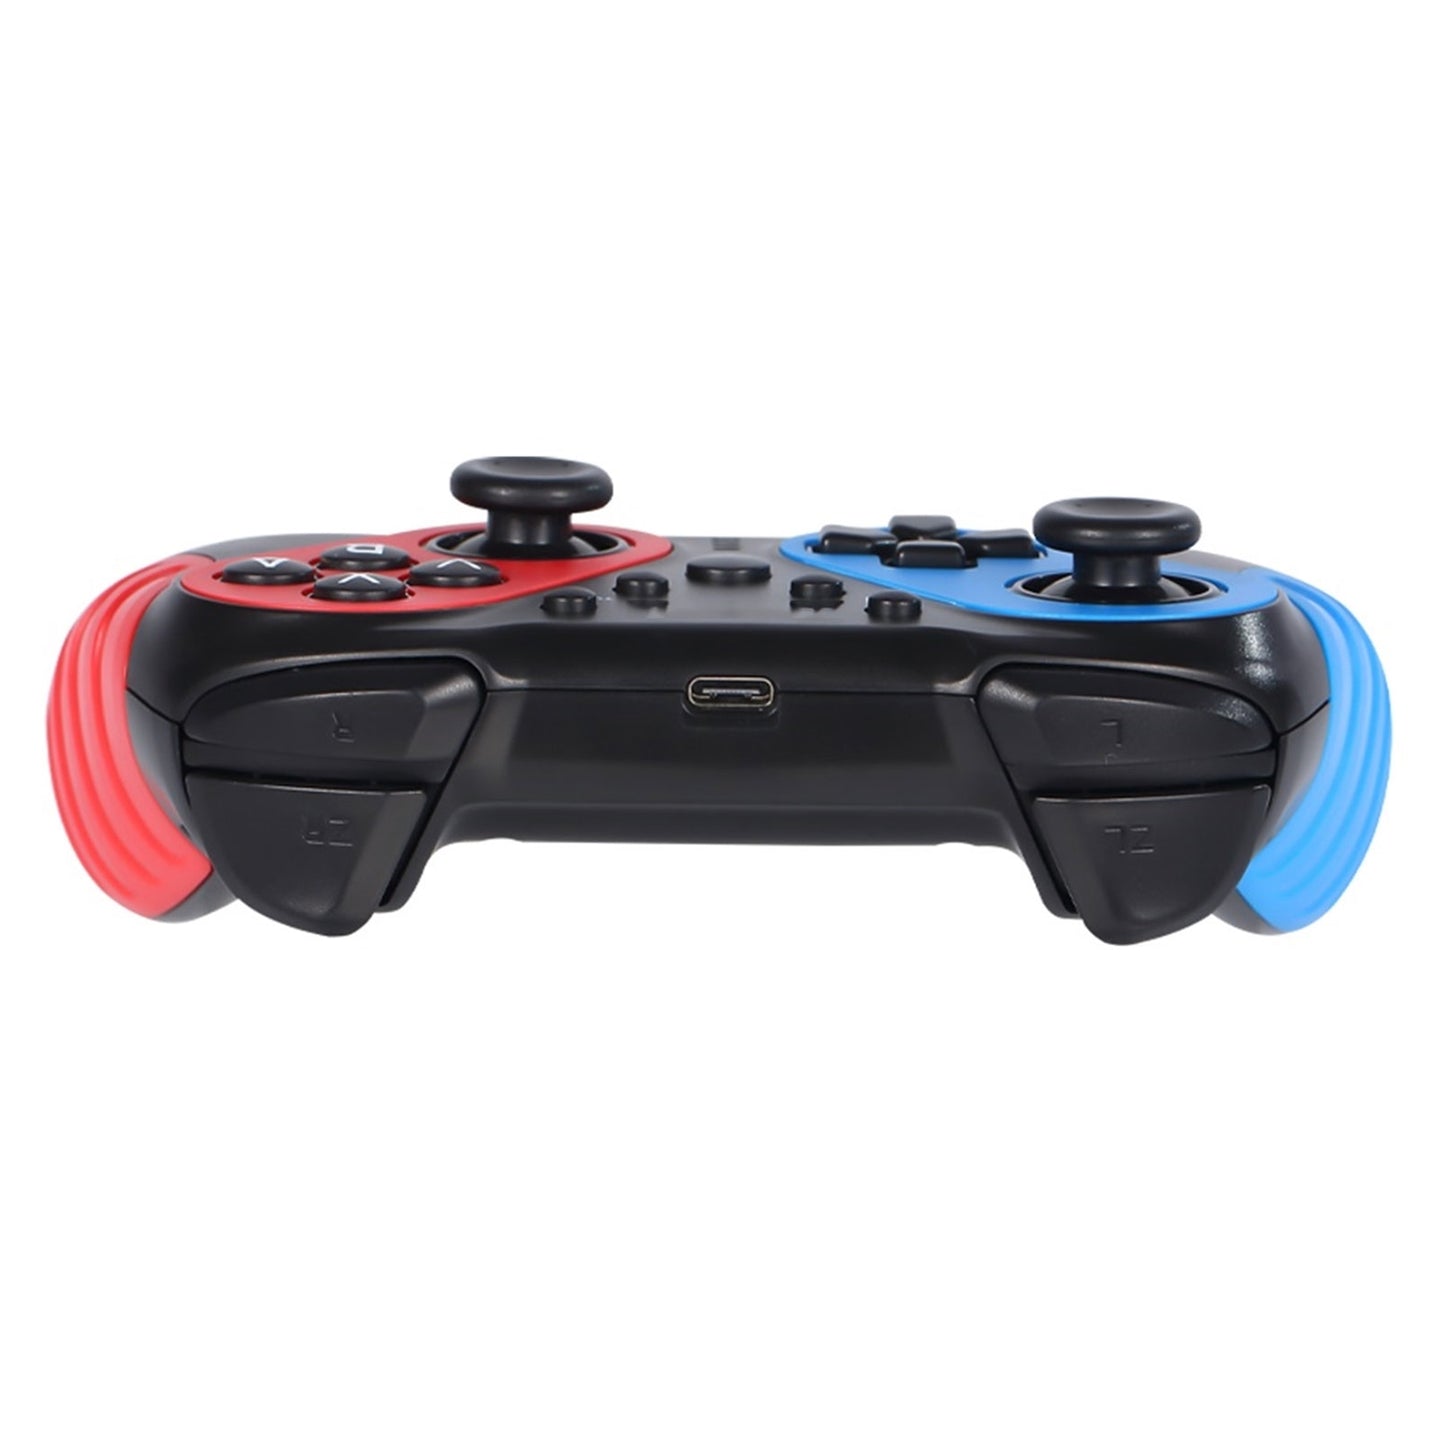 MARVO Scorpion GT-52 Multi-Platform Gamepad Controller for Nintendo Switch, PC and Android, Rechargeable, Wired (USB Type-C) and Wireless, Bluetooth 4.0, 6-axis sensor and Dual Vibration